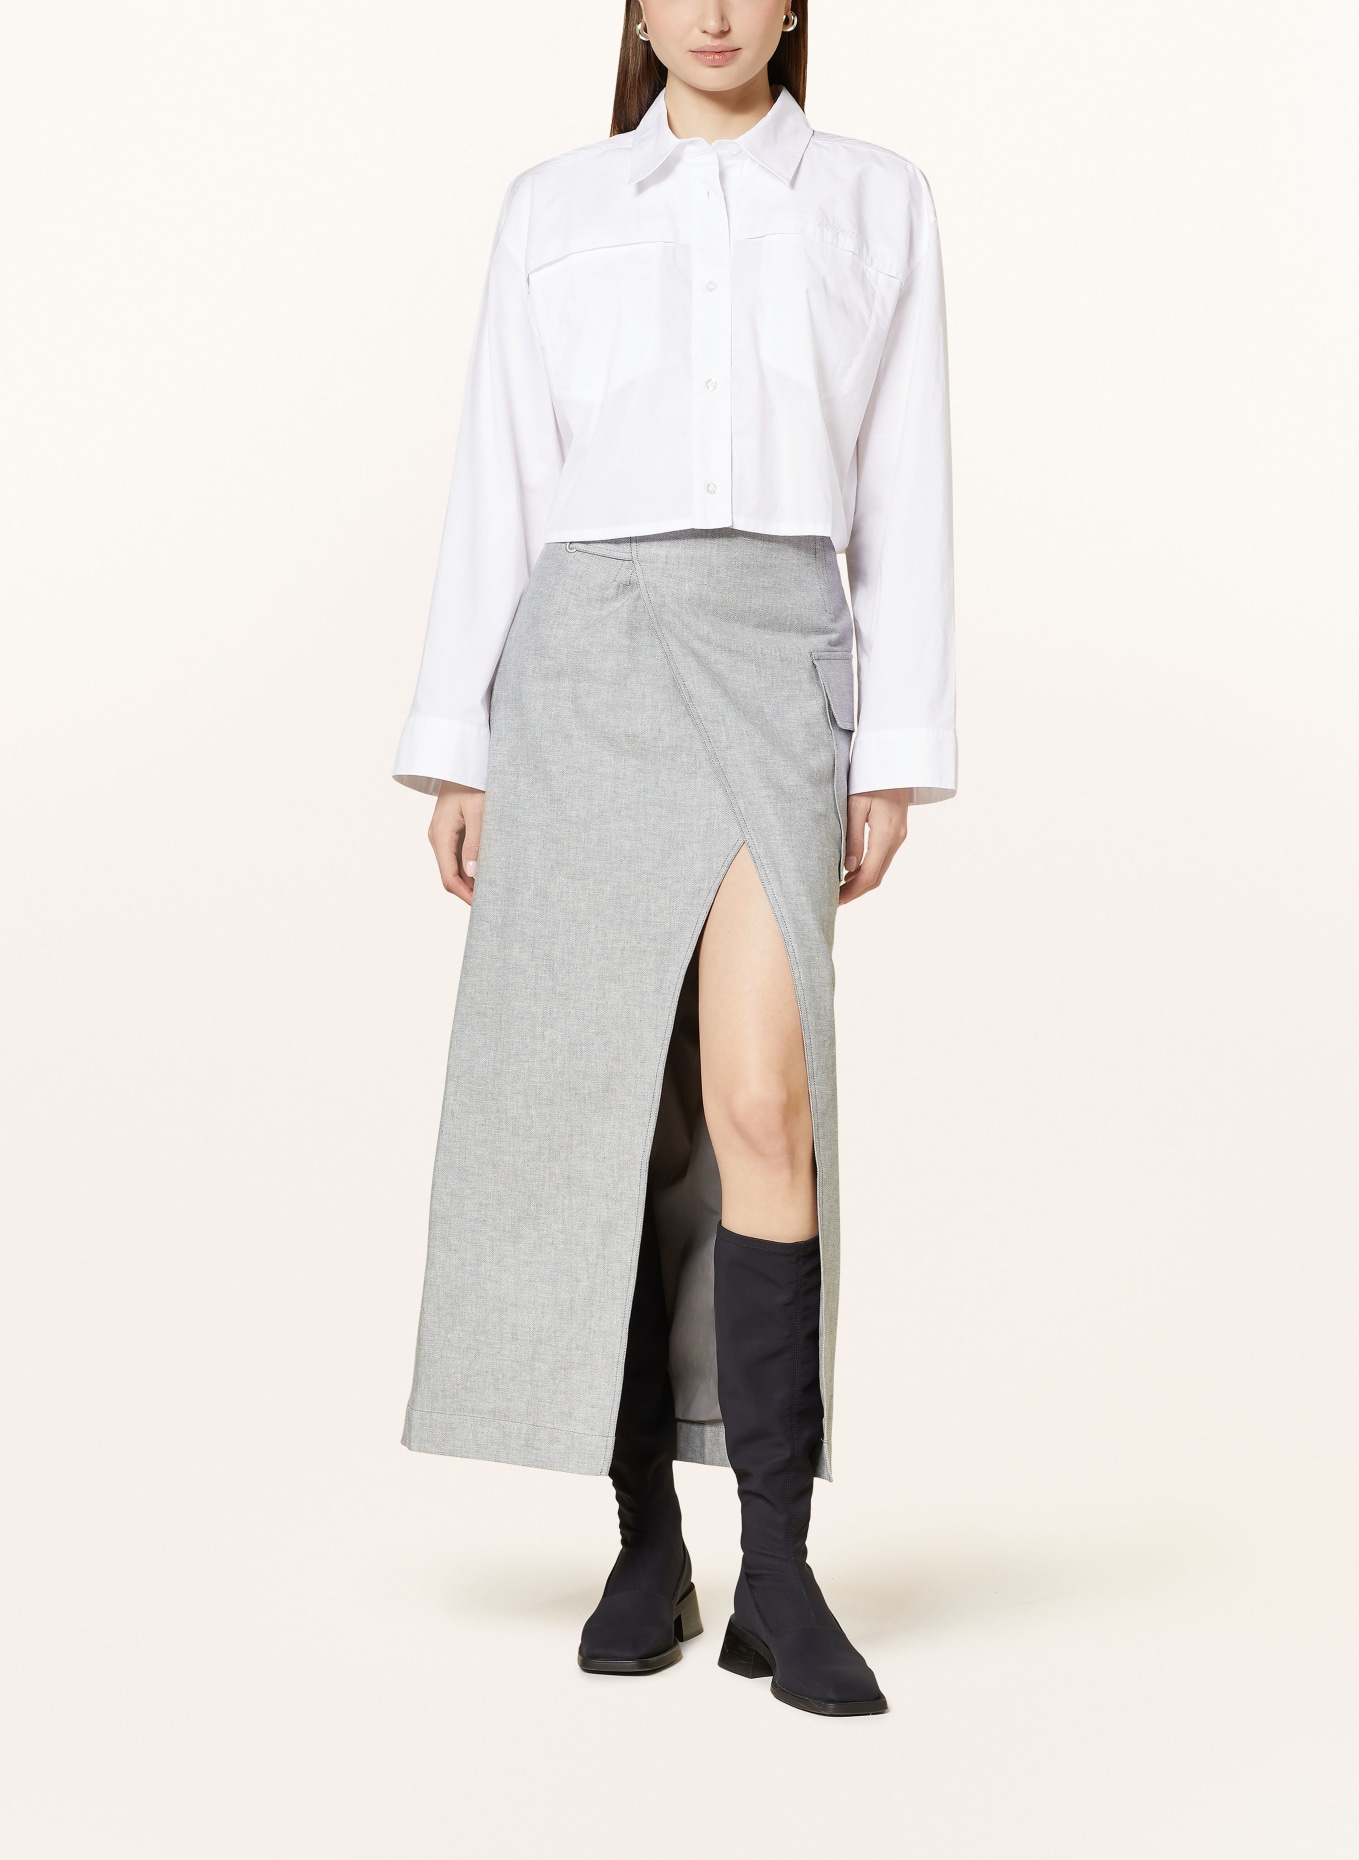 REMAIN Cropped shirt blouse, Color: WHITE (Image 2)